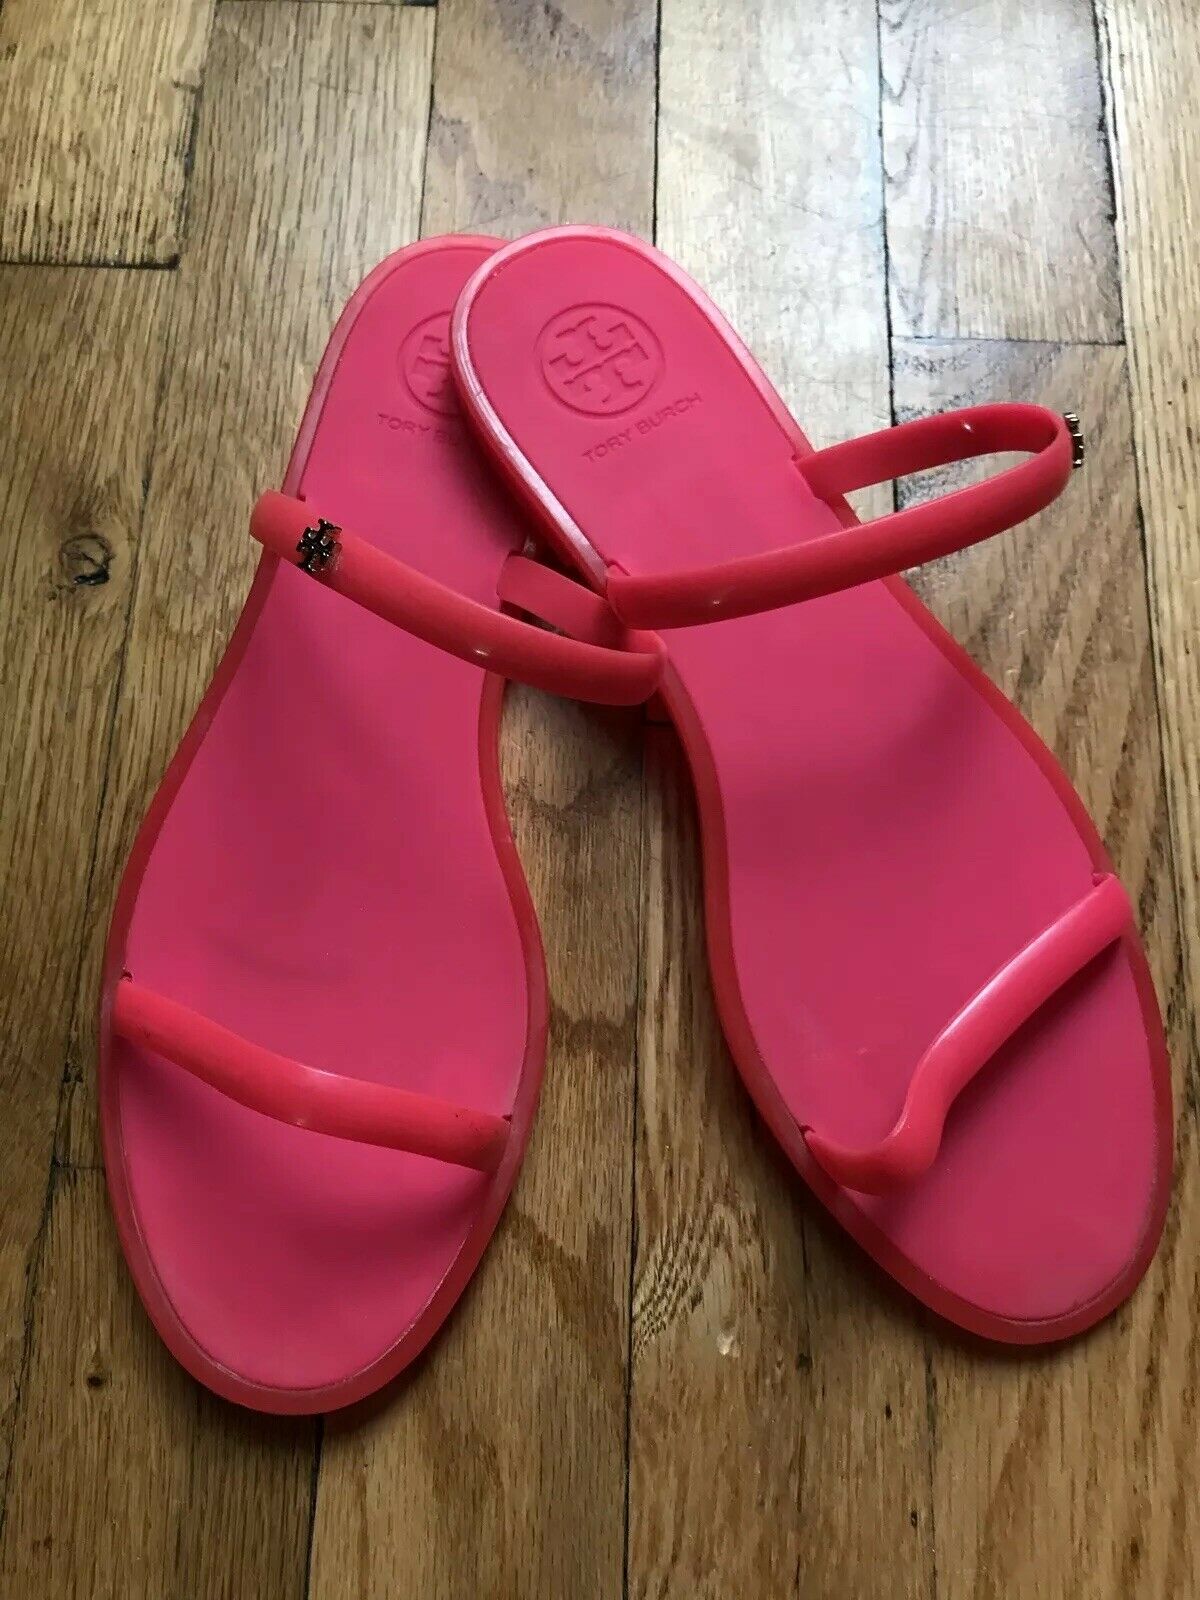 TORY BURCH Hot Pink Jelly Slip On Slippers Size 8